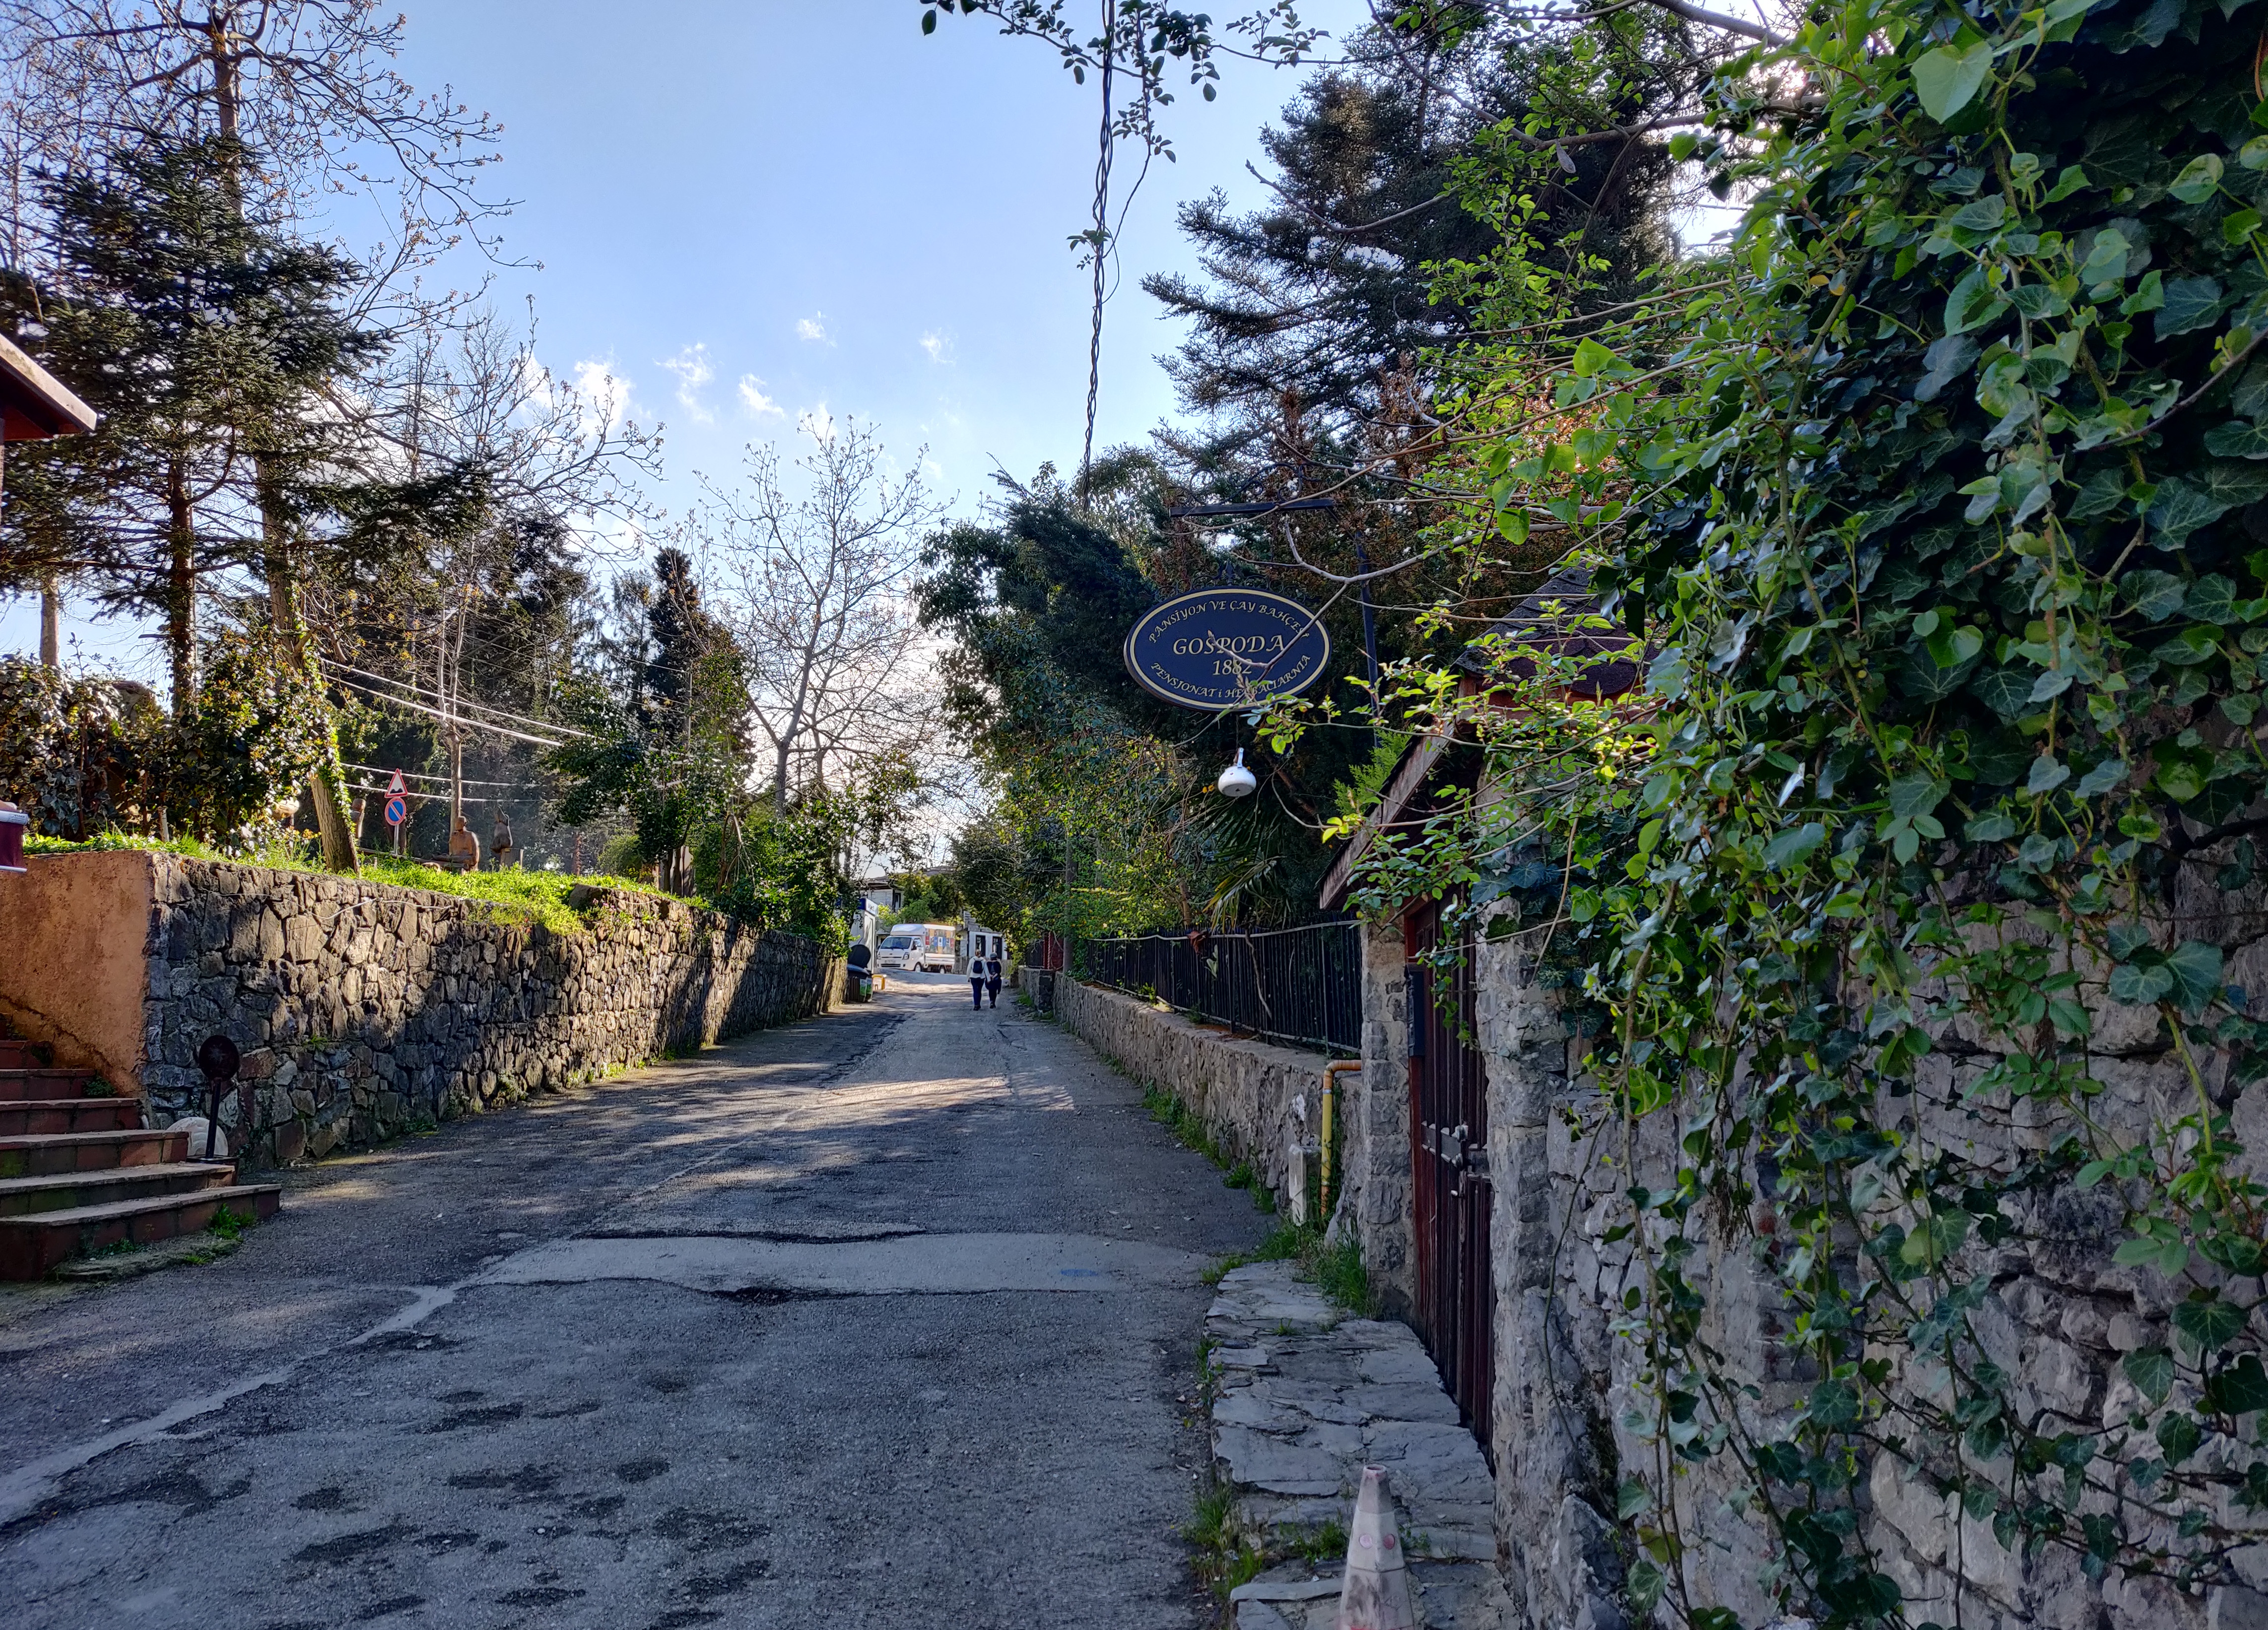 The charming rustic and historic streets in Polonezköy.